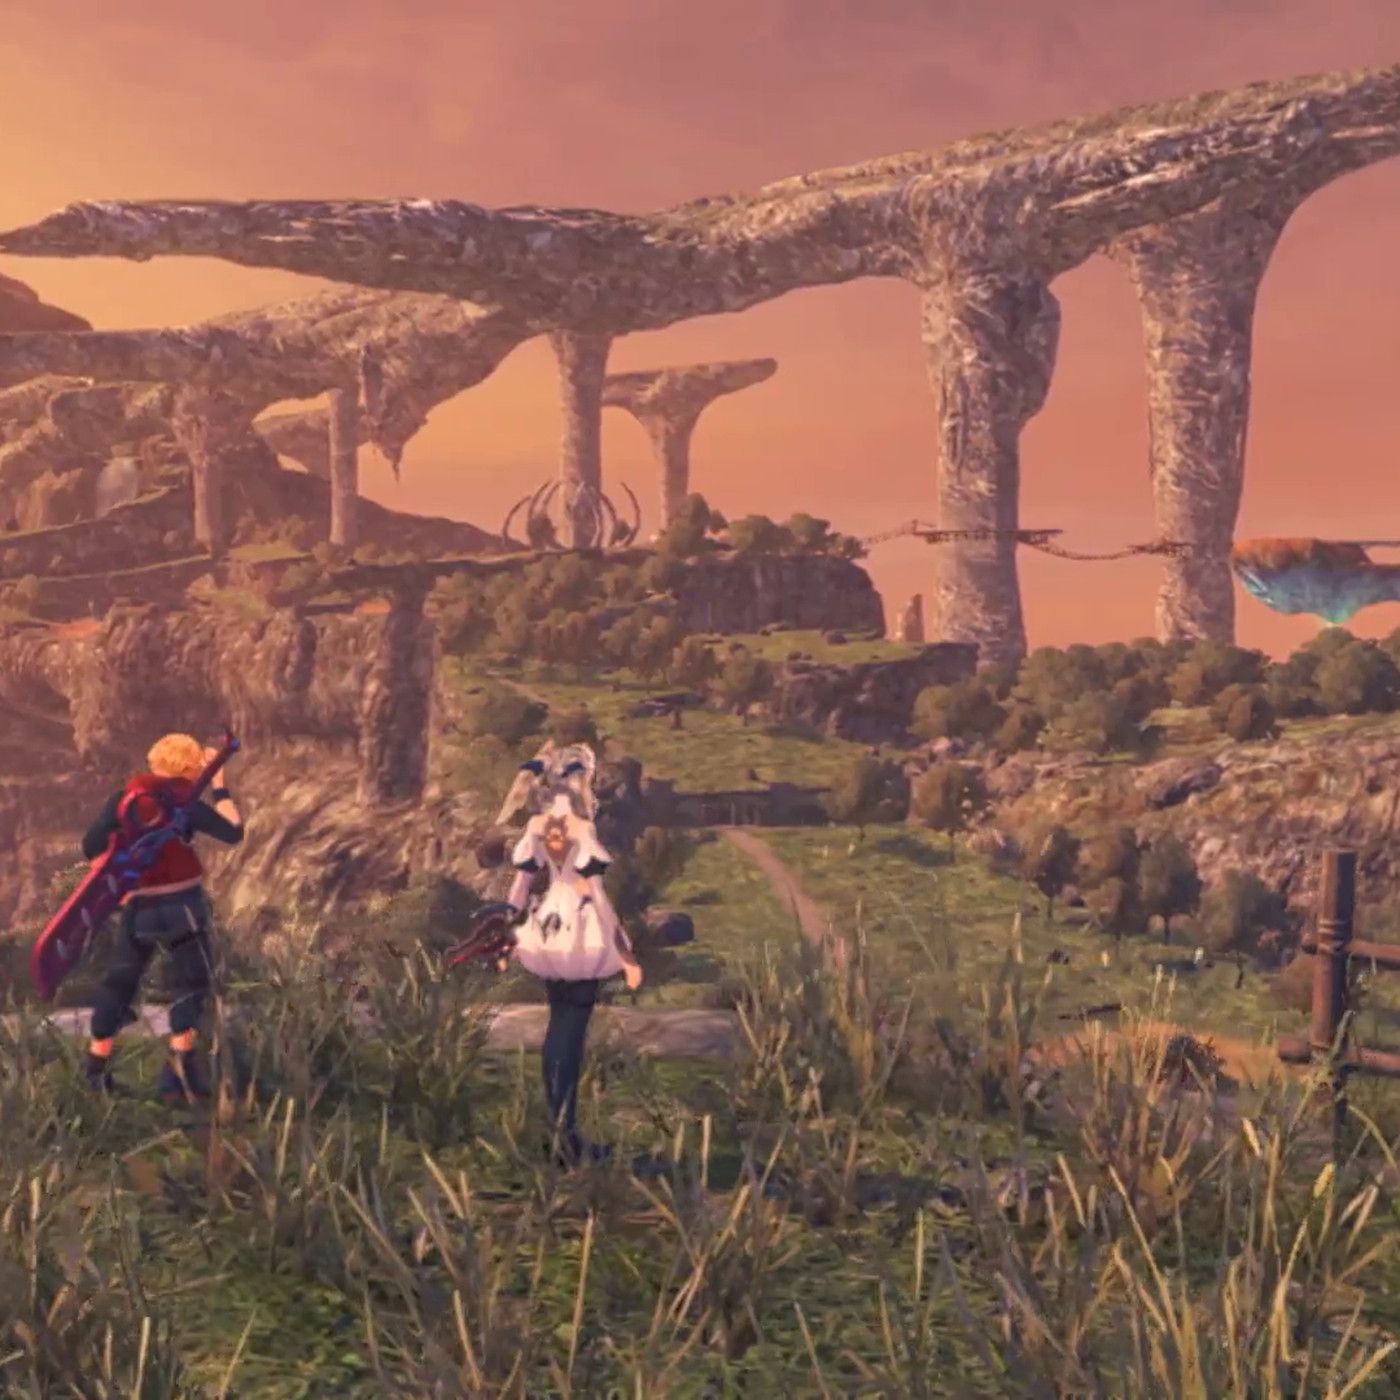 Xenoblade Chronicles is getting a remake for Nintendo Switch